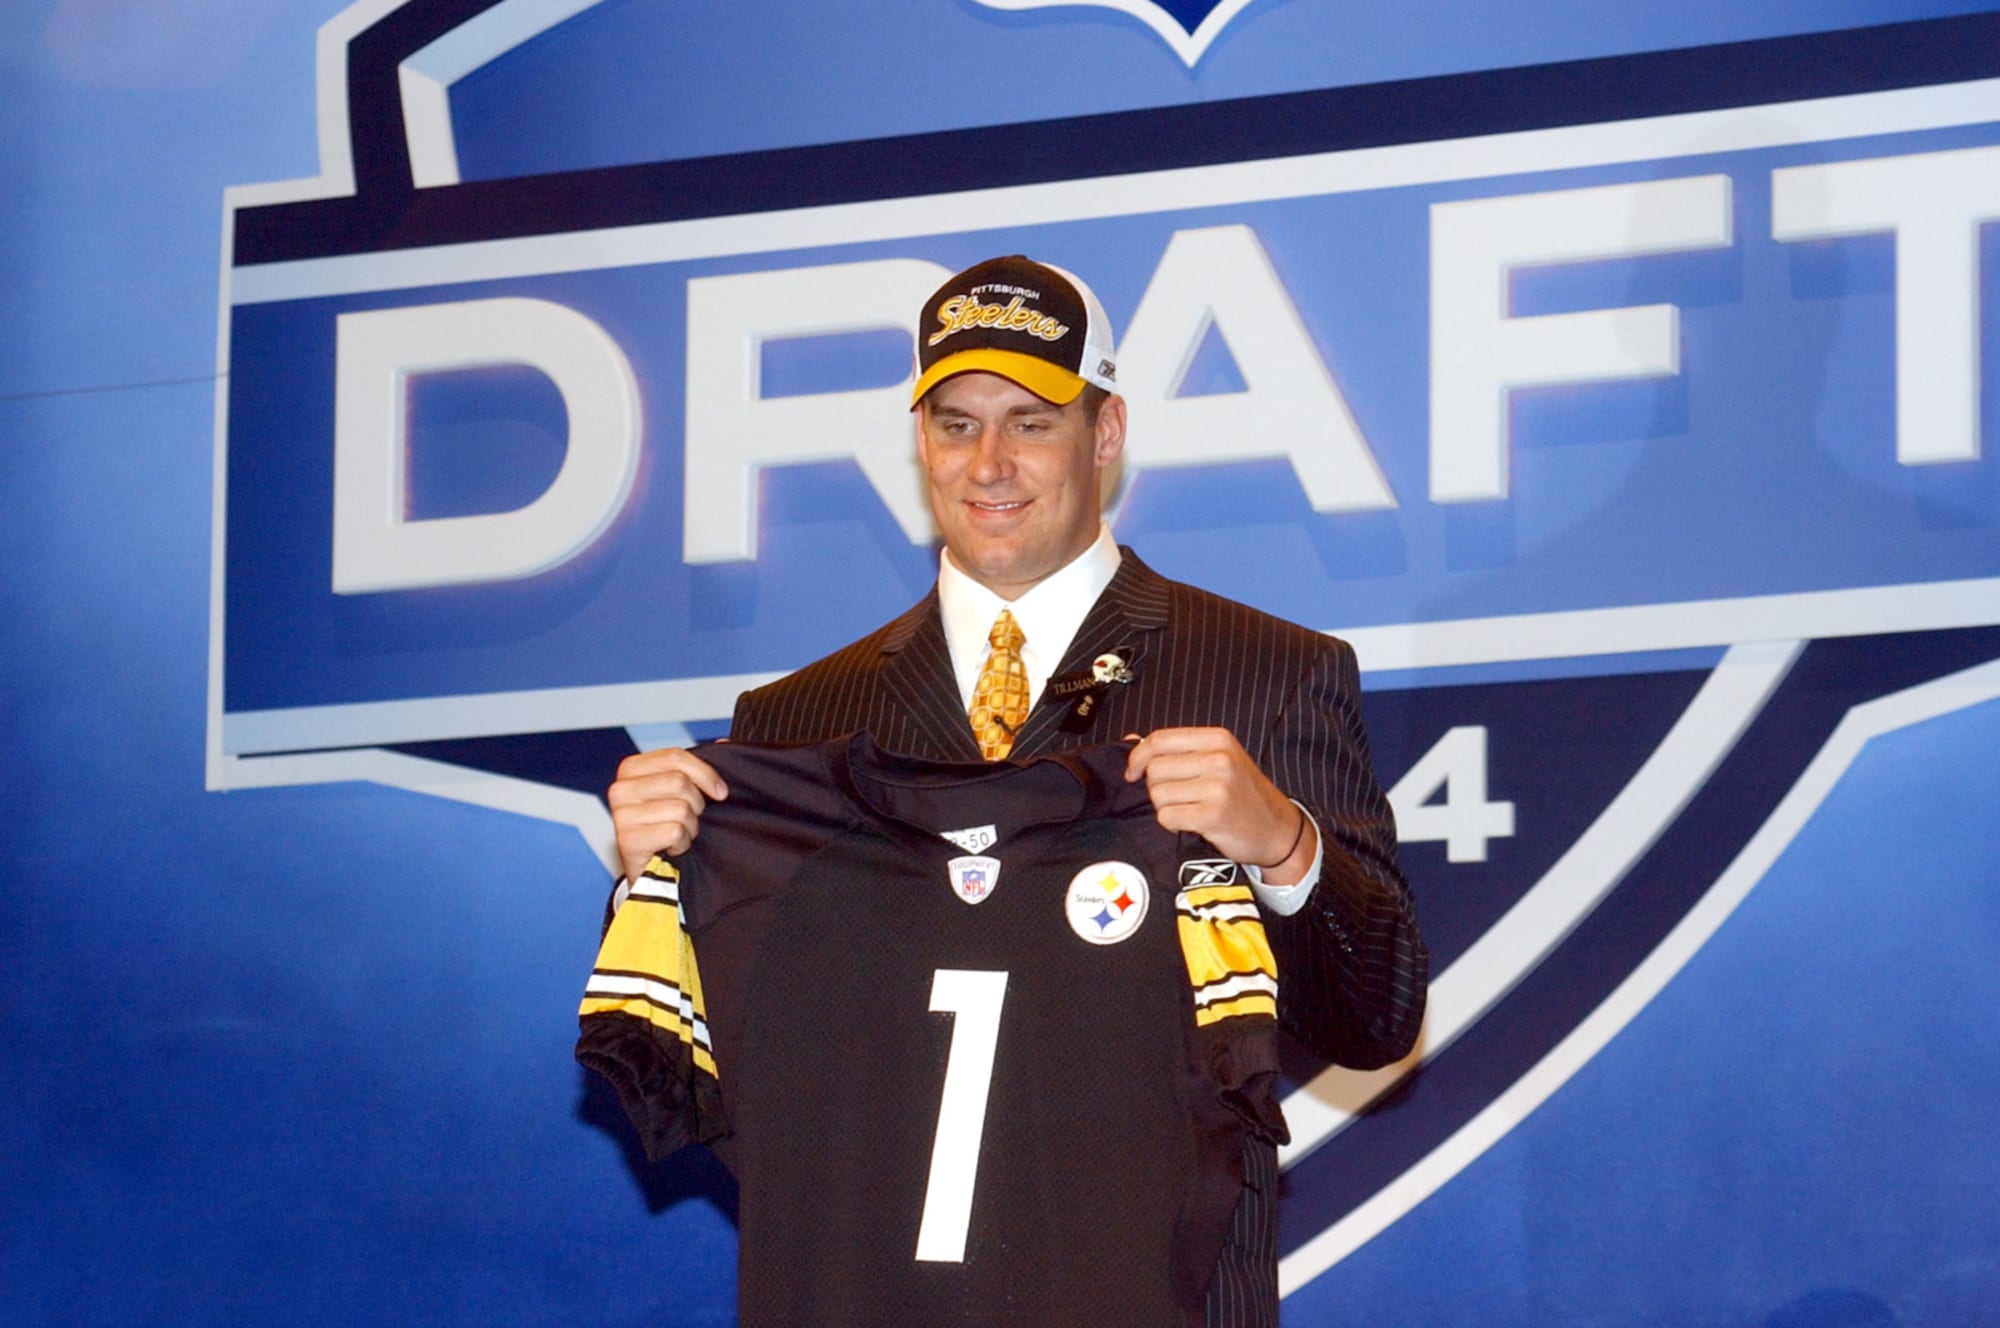 Steelers QB Ben Roethlisberger goes 1st overall in 2004 NFL redraft